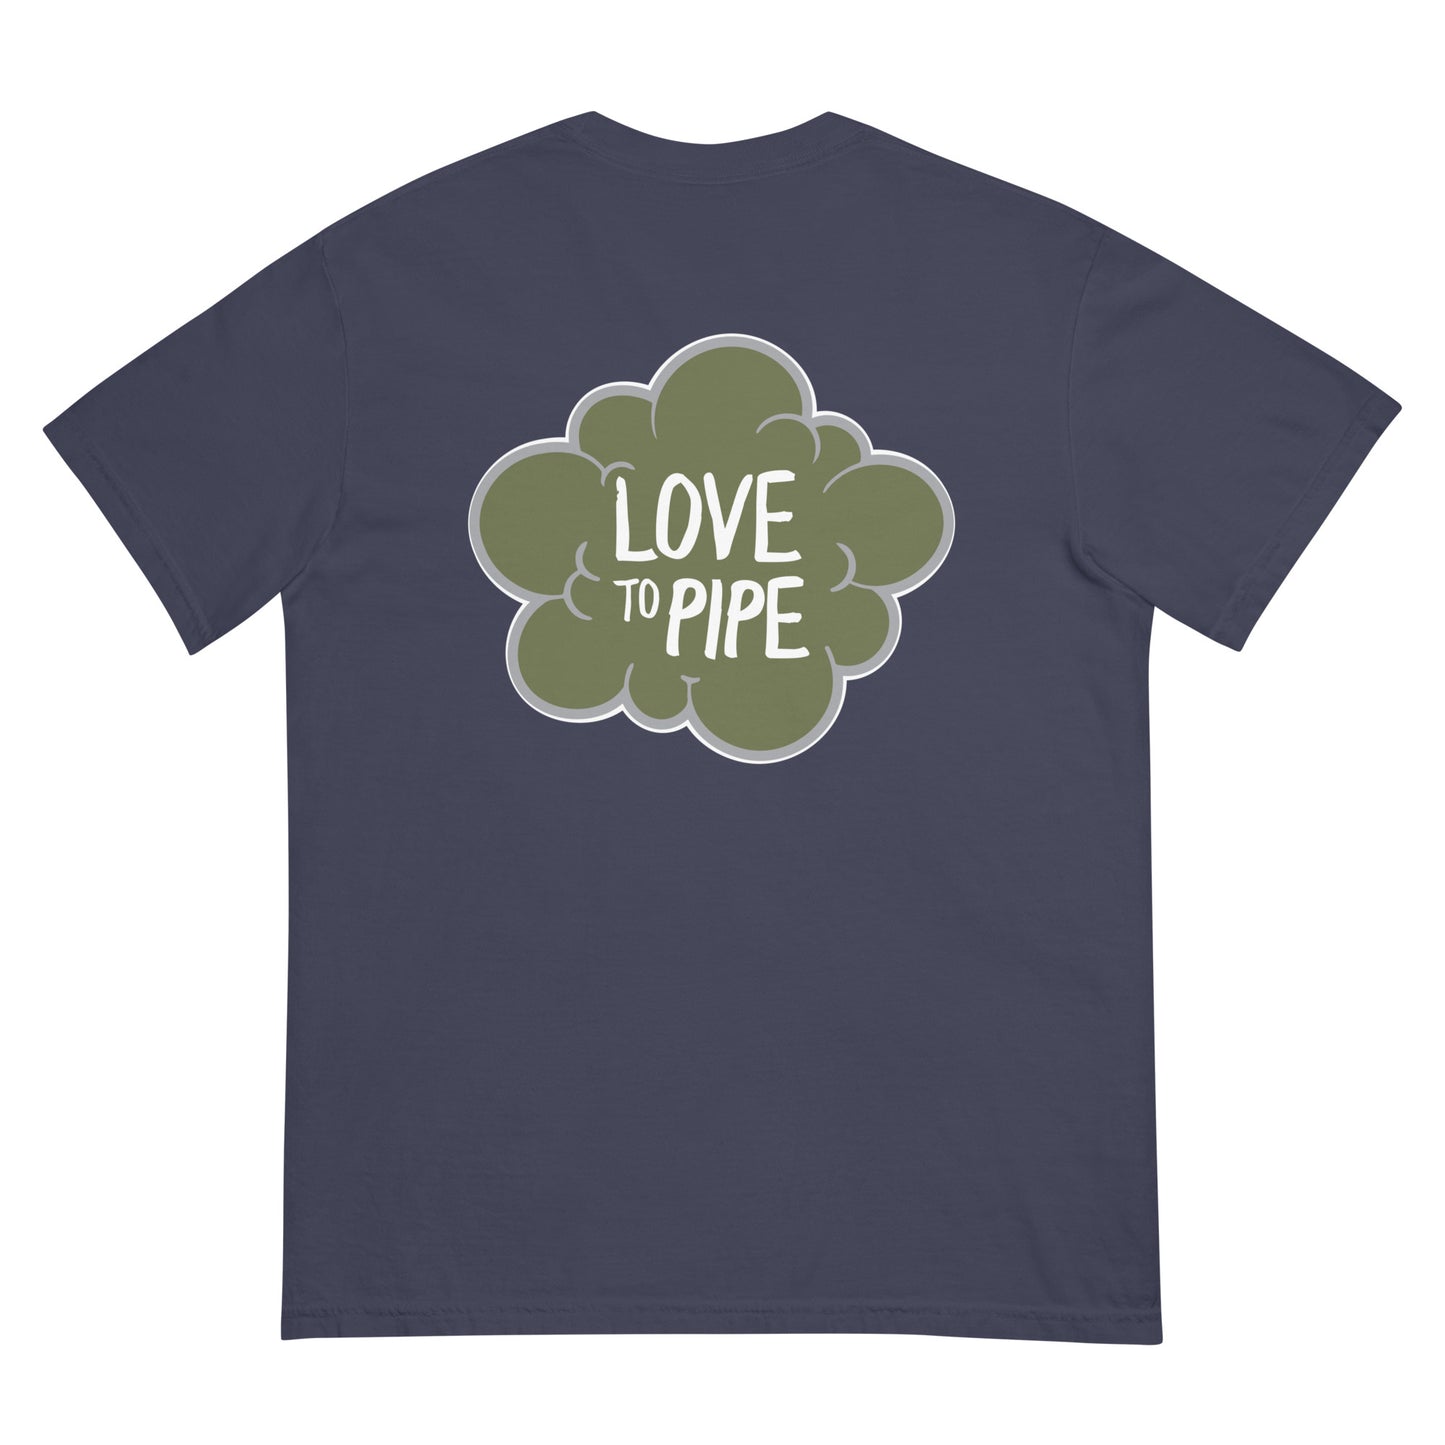 “Love to Pipe” Tee